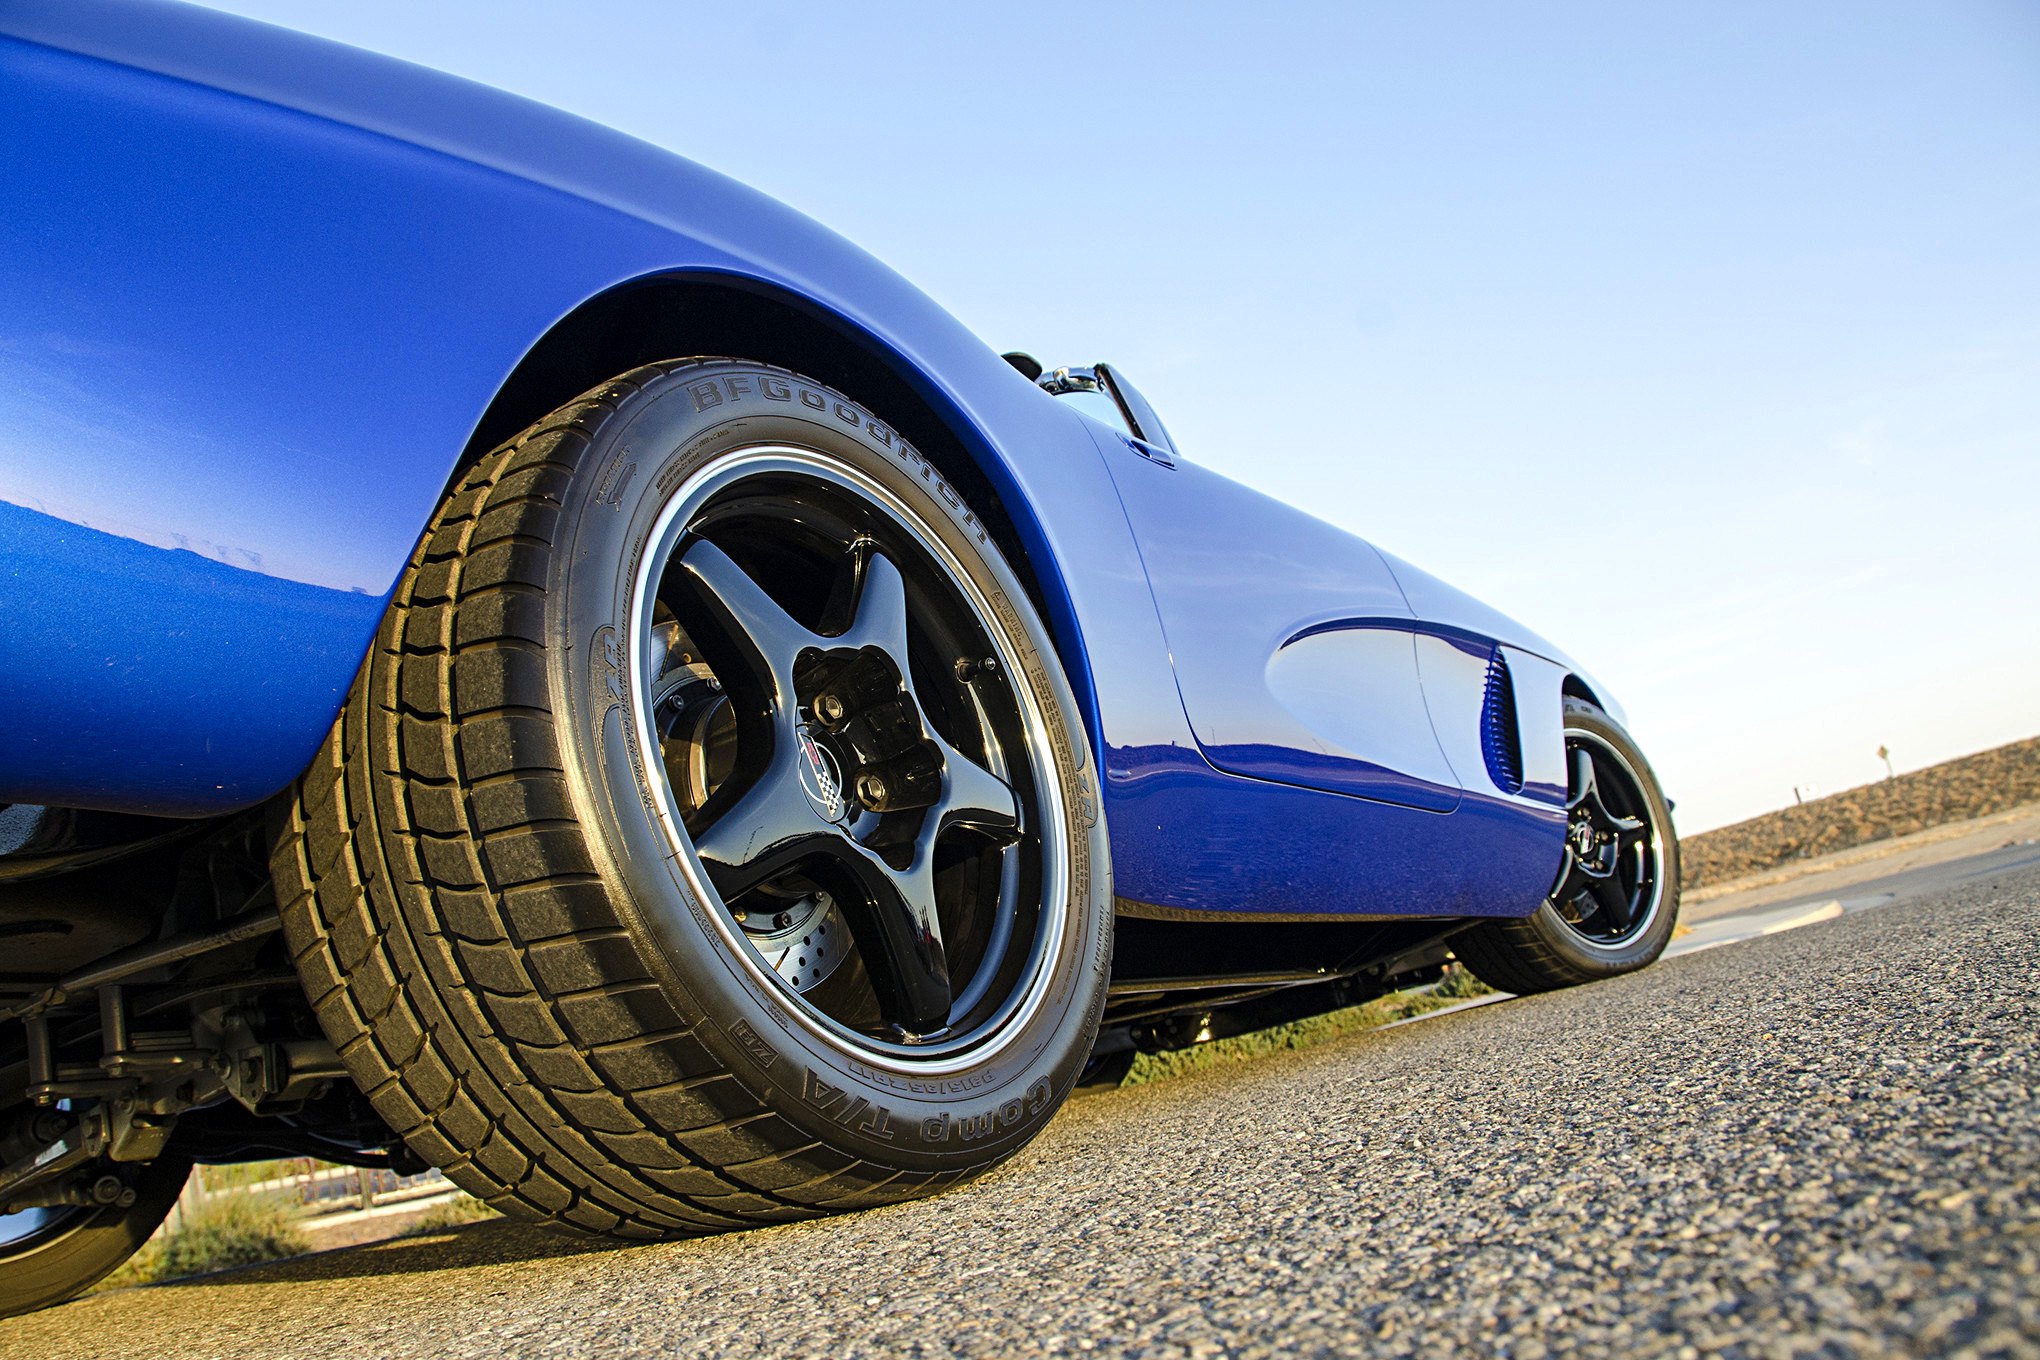 Blue Convertible Chevy Corvette on BFGoodrich Tires - Photo by Steve Temple